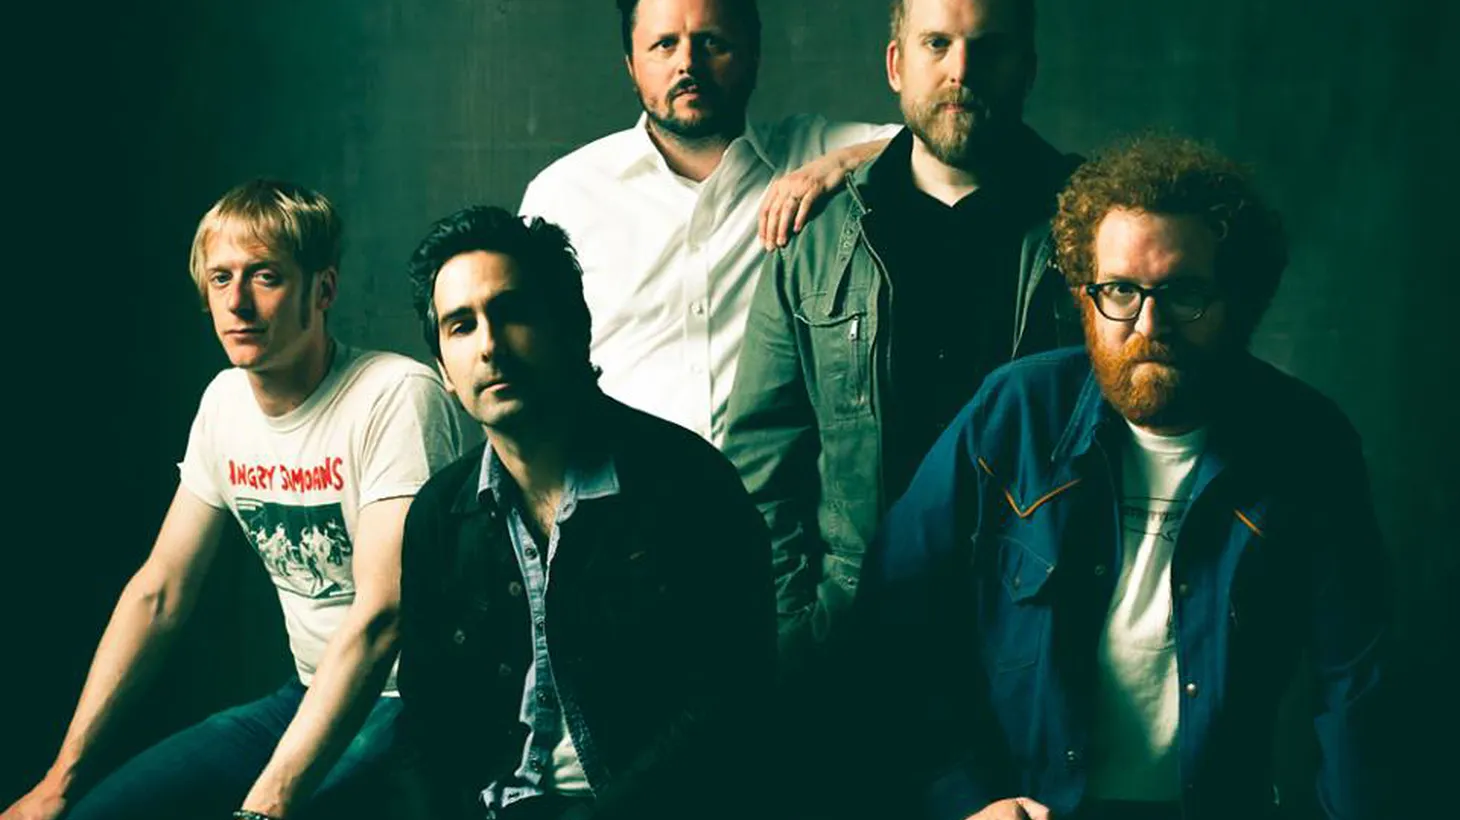 Portland-based band Blitzen Trapper has explored folk, country, psychedelia and more in previous releases, landing on a sunnier rock sound for their latest studio effort, All Across This Land.